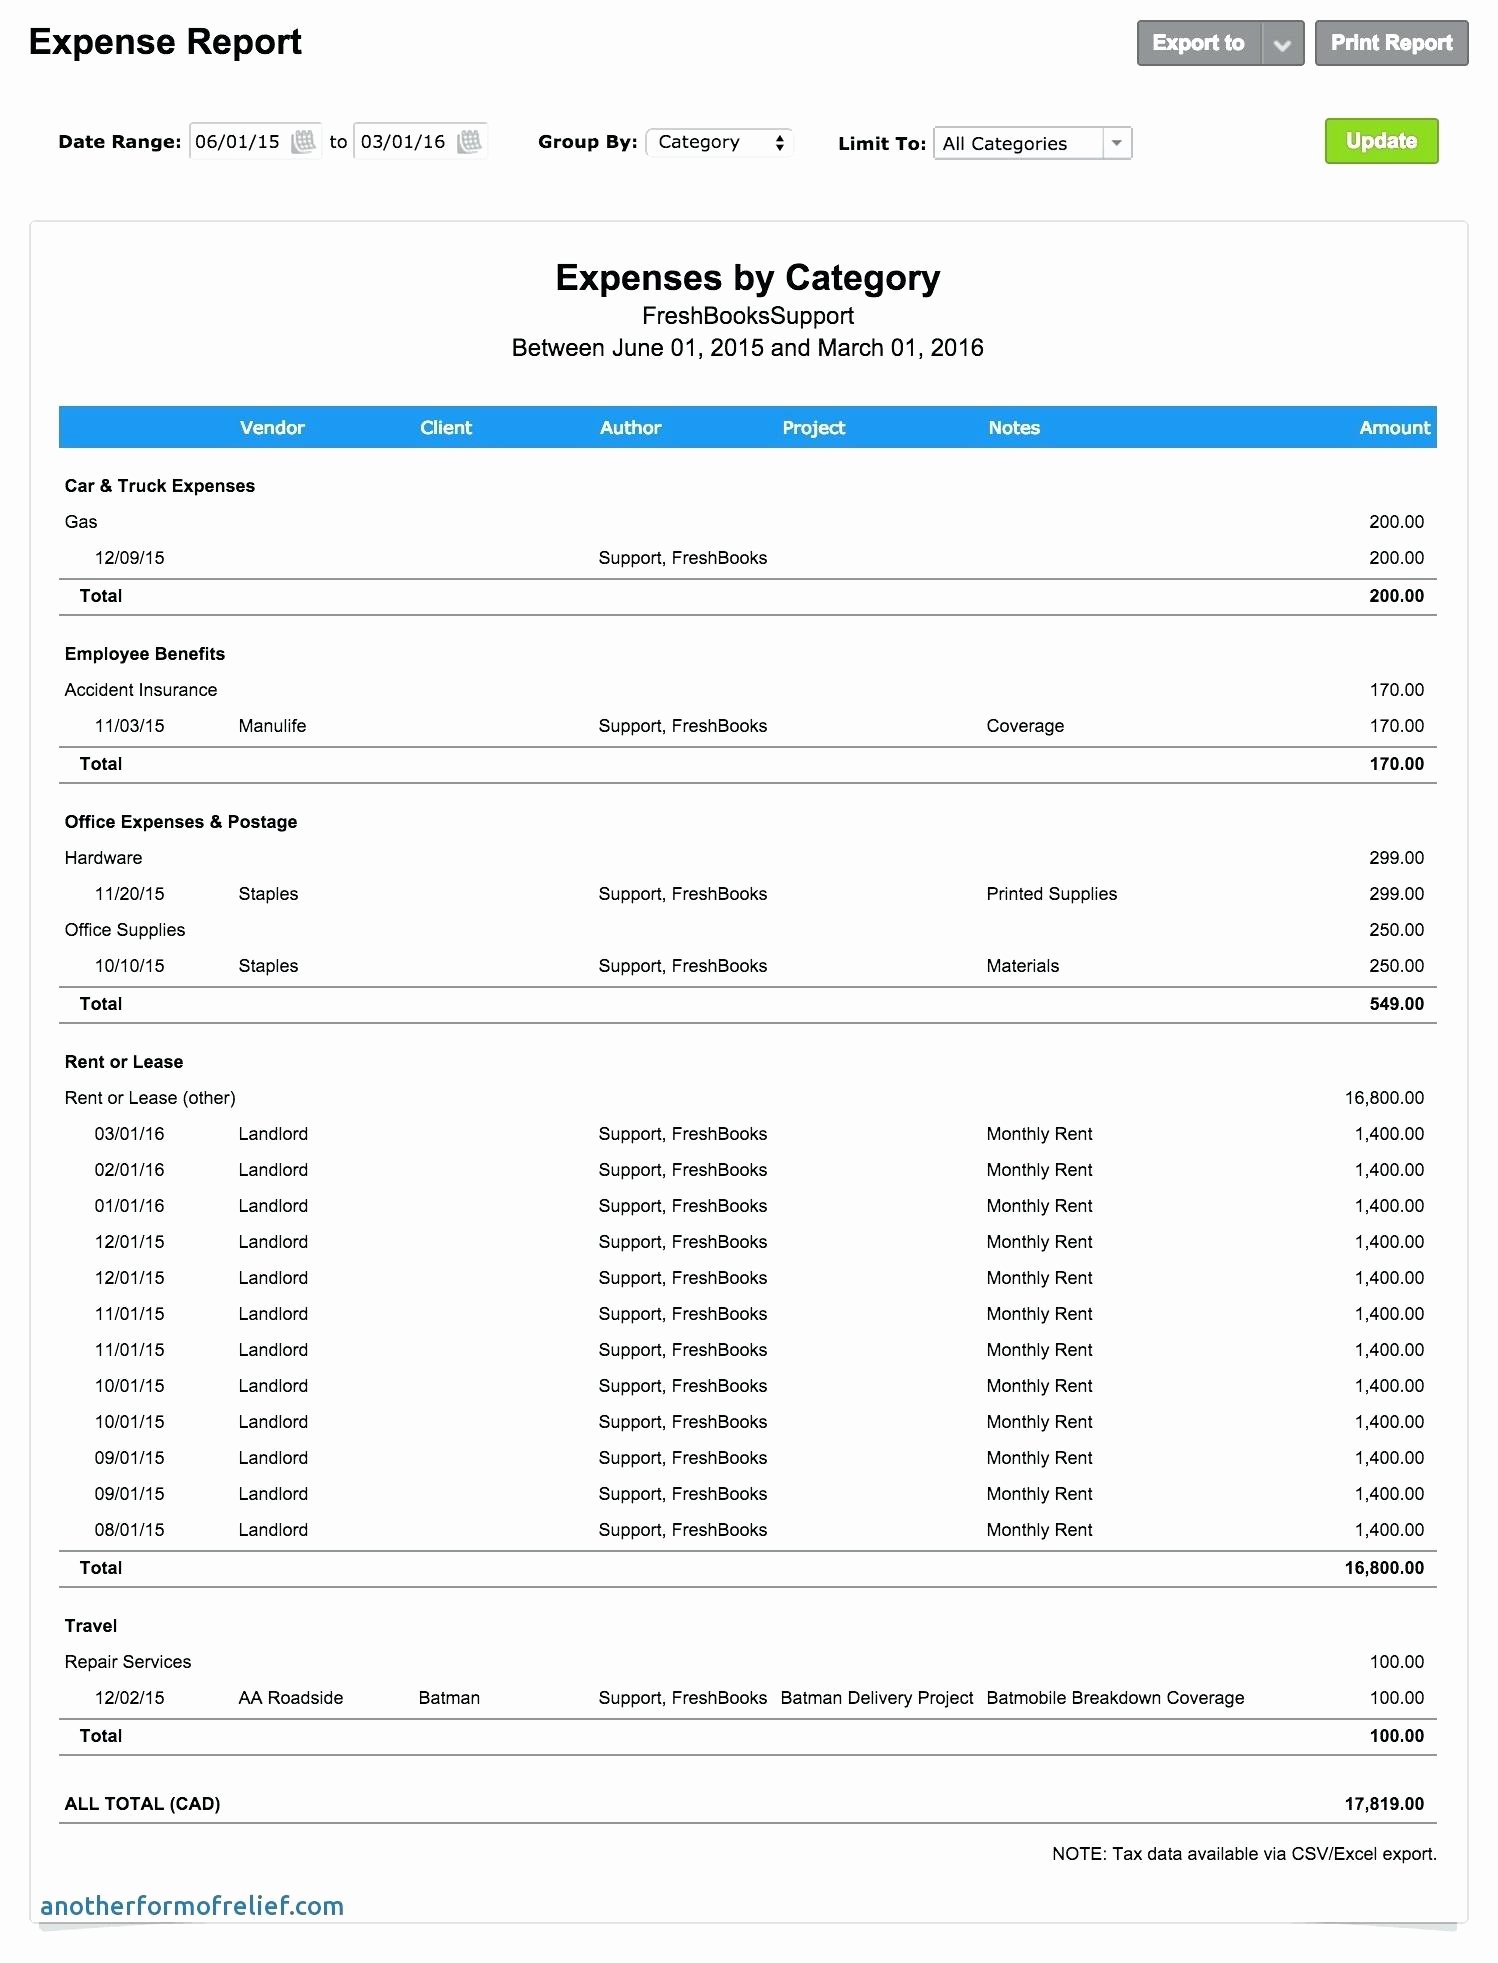 Expenses Report Template Excel Beautiful Template Excel Expense Report Template